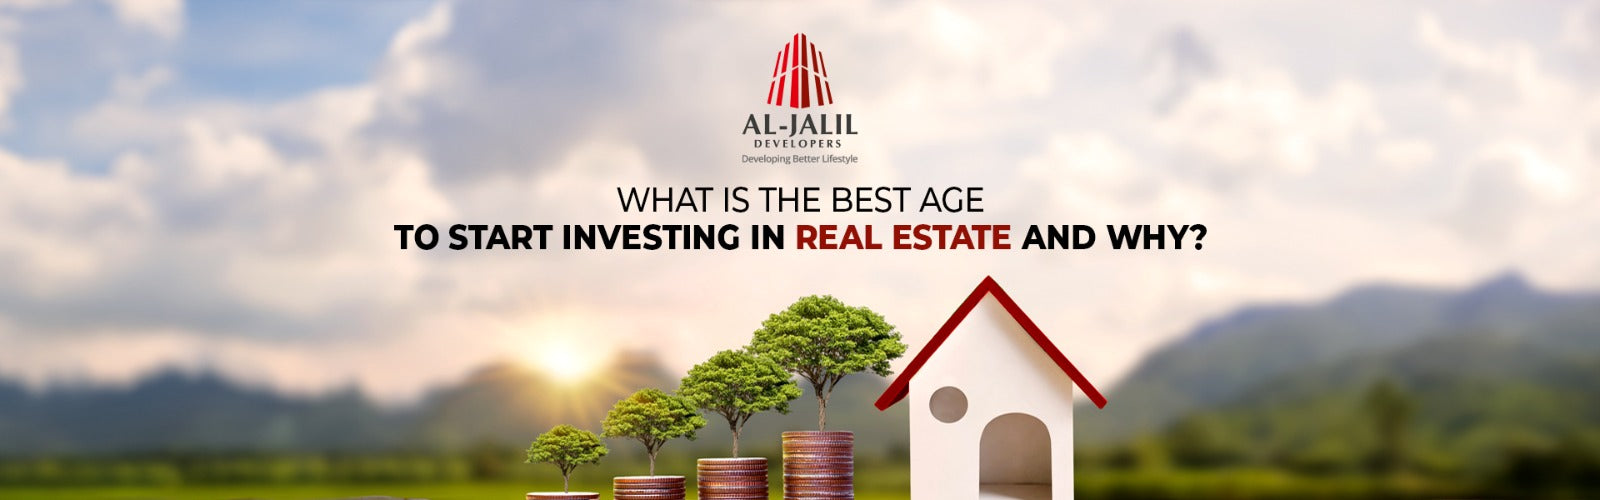 What is the Best Age to Start Investing in Real Estate and Why?